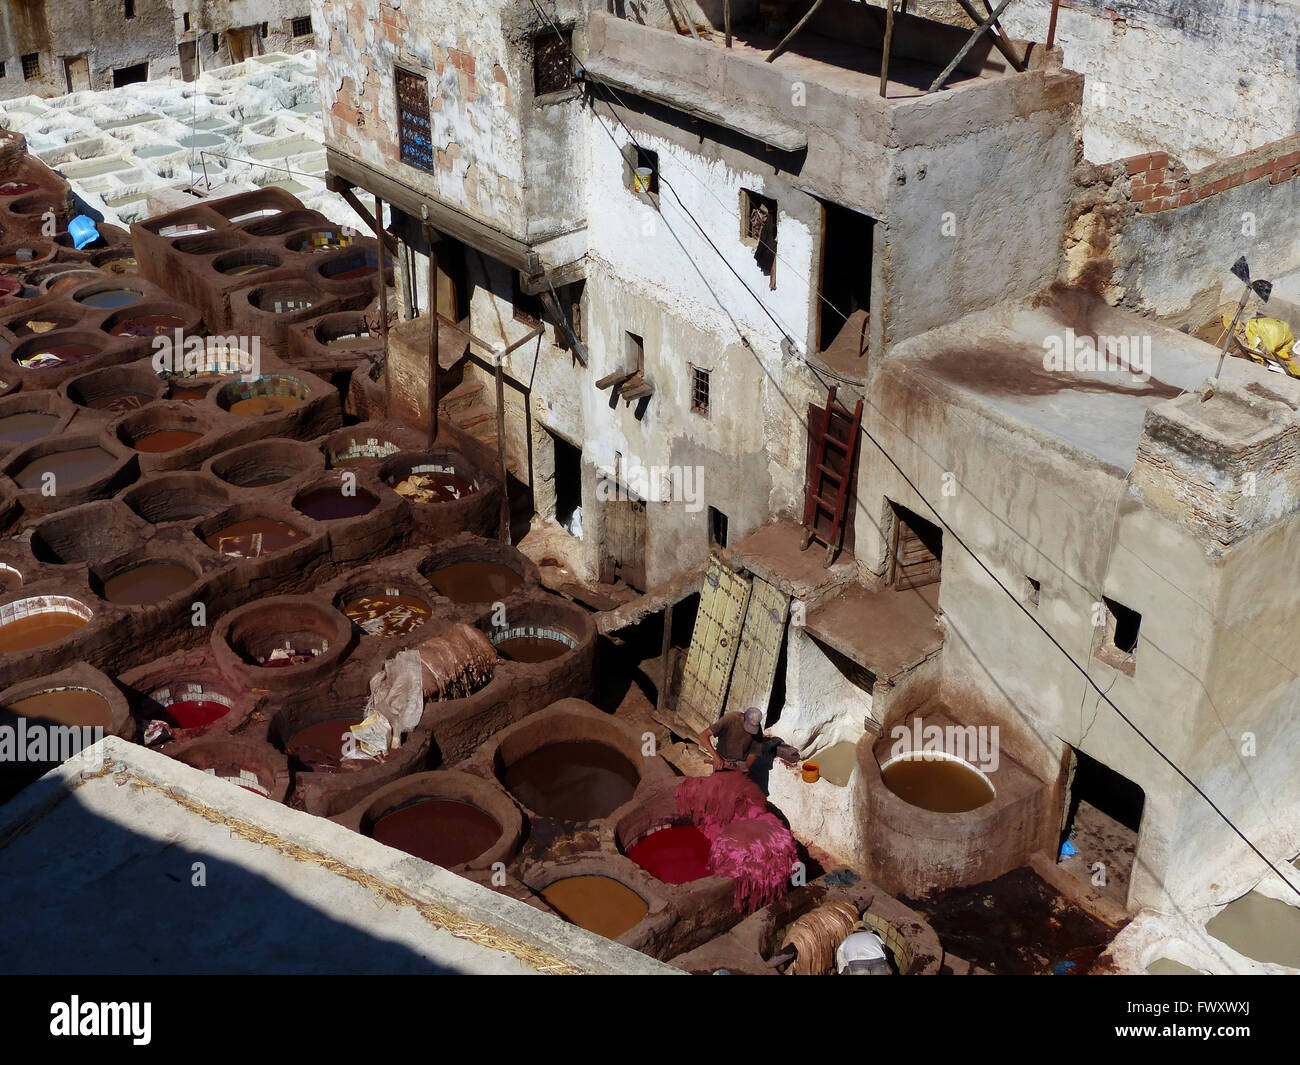 Morocco, Fes, Leather industry a leather tannery Stock Photo